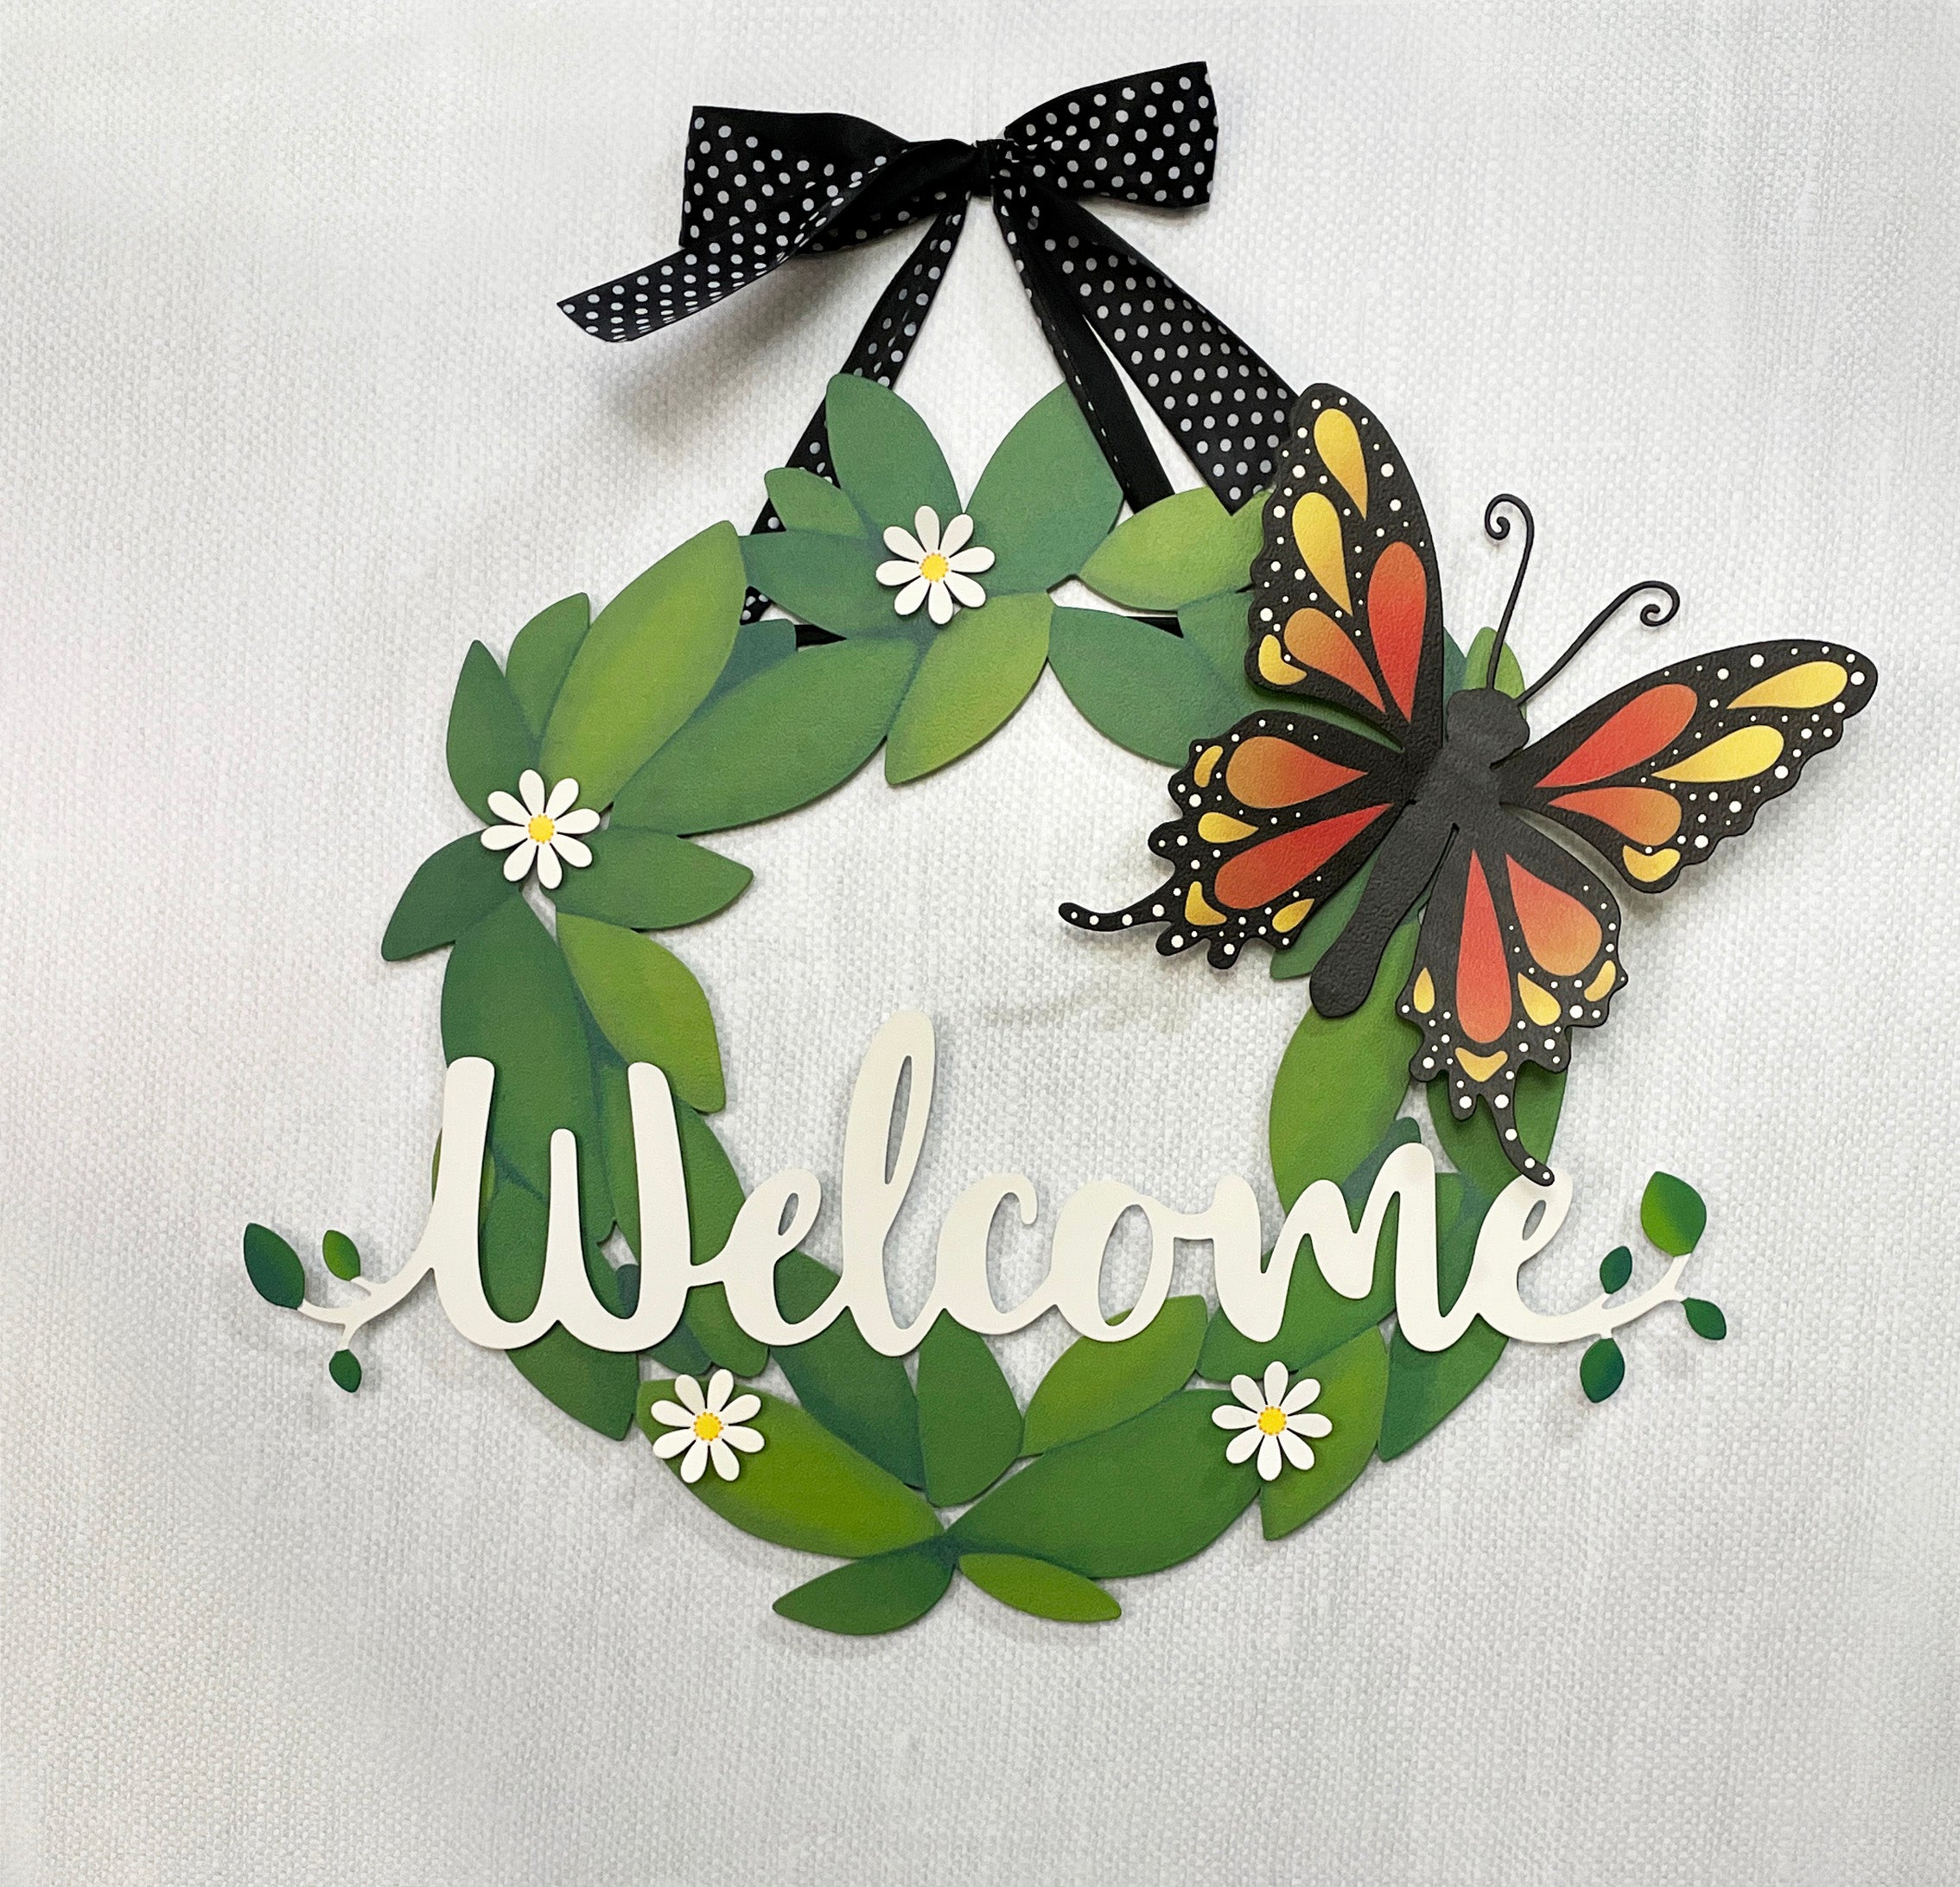 &quot;Welcome&quot; Magnetic Word w/ Greenery - 18&quot; White